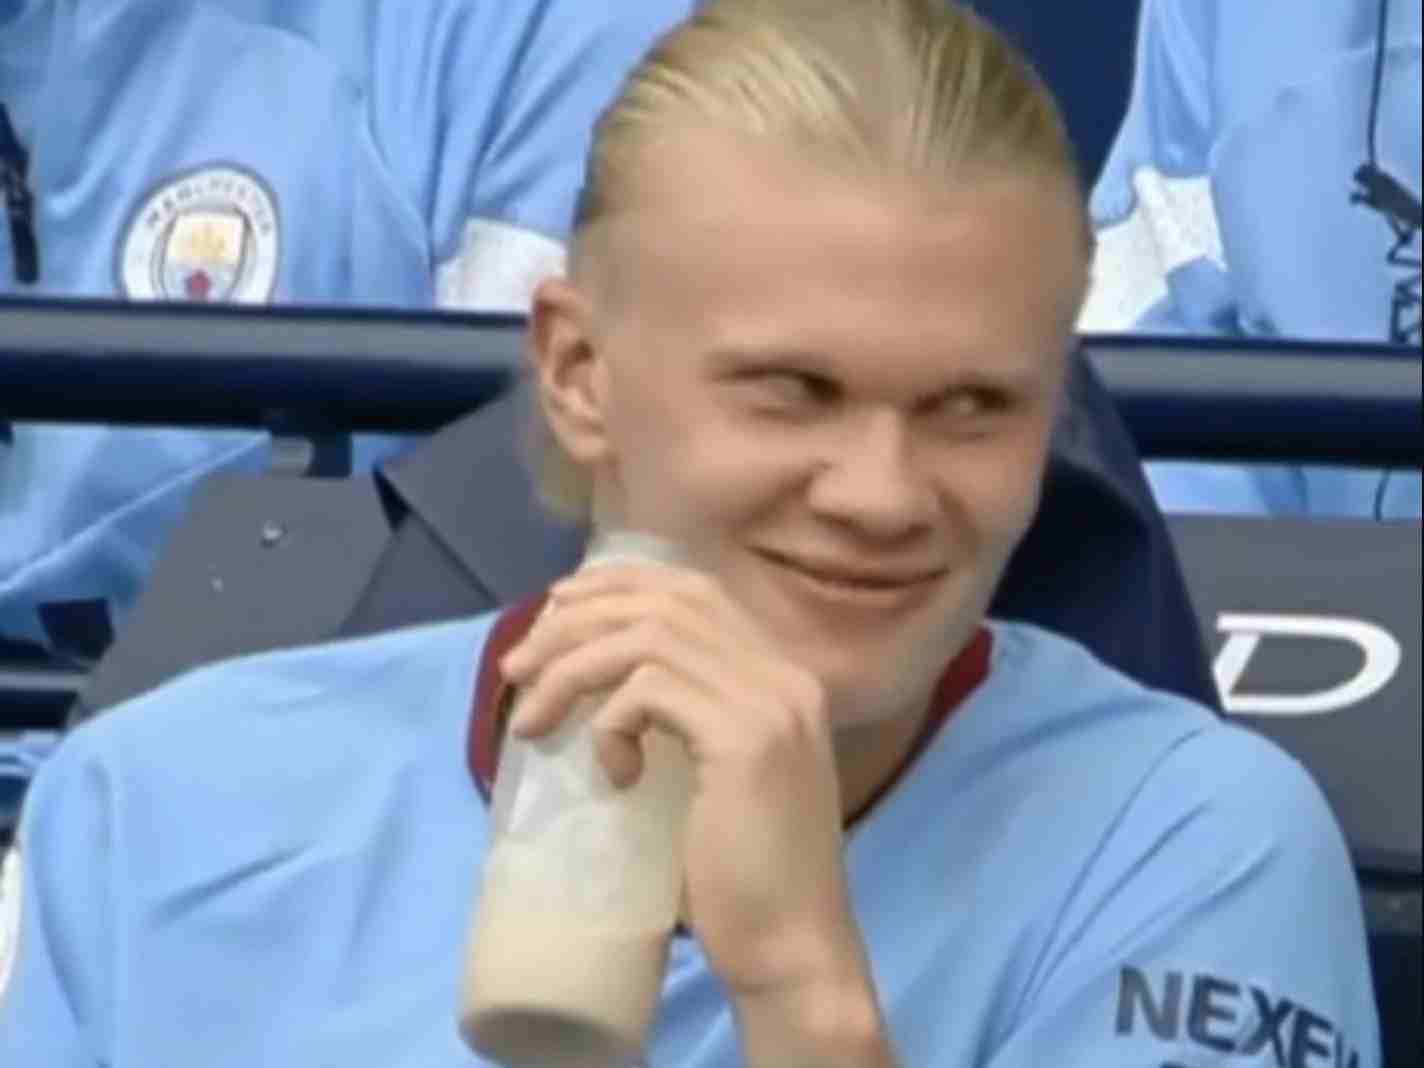 Erling Haaland Urged to ‘Fire More Goals’ as Man City Treble-winner Strikes Happy Pose with Croatian Model Ivana Knoll